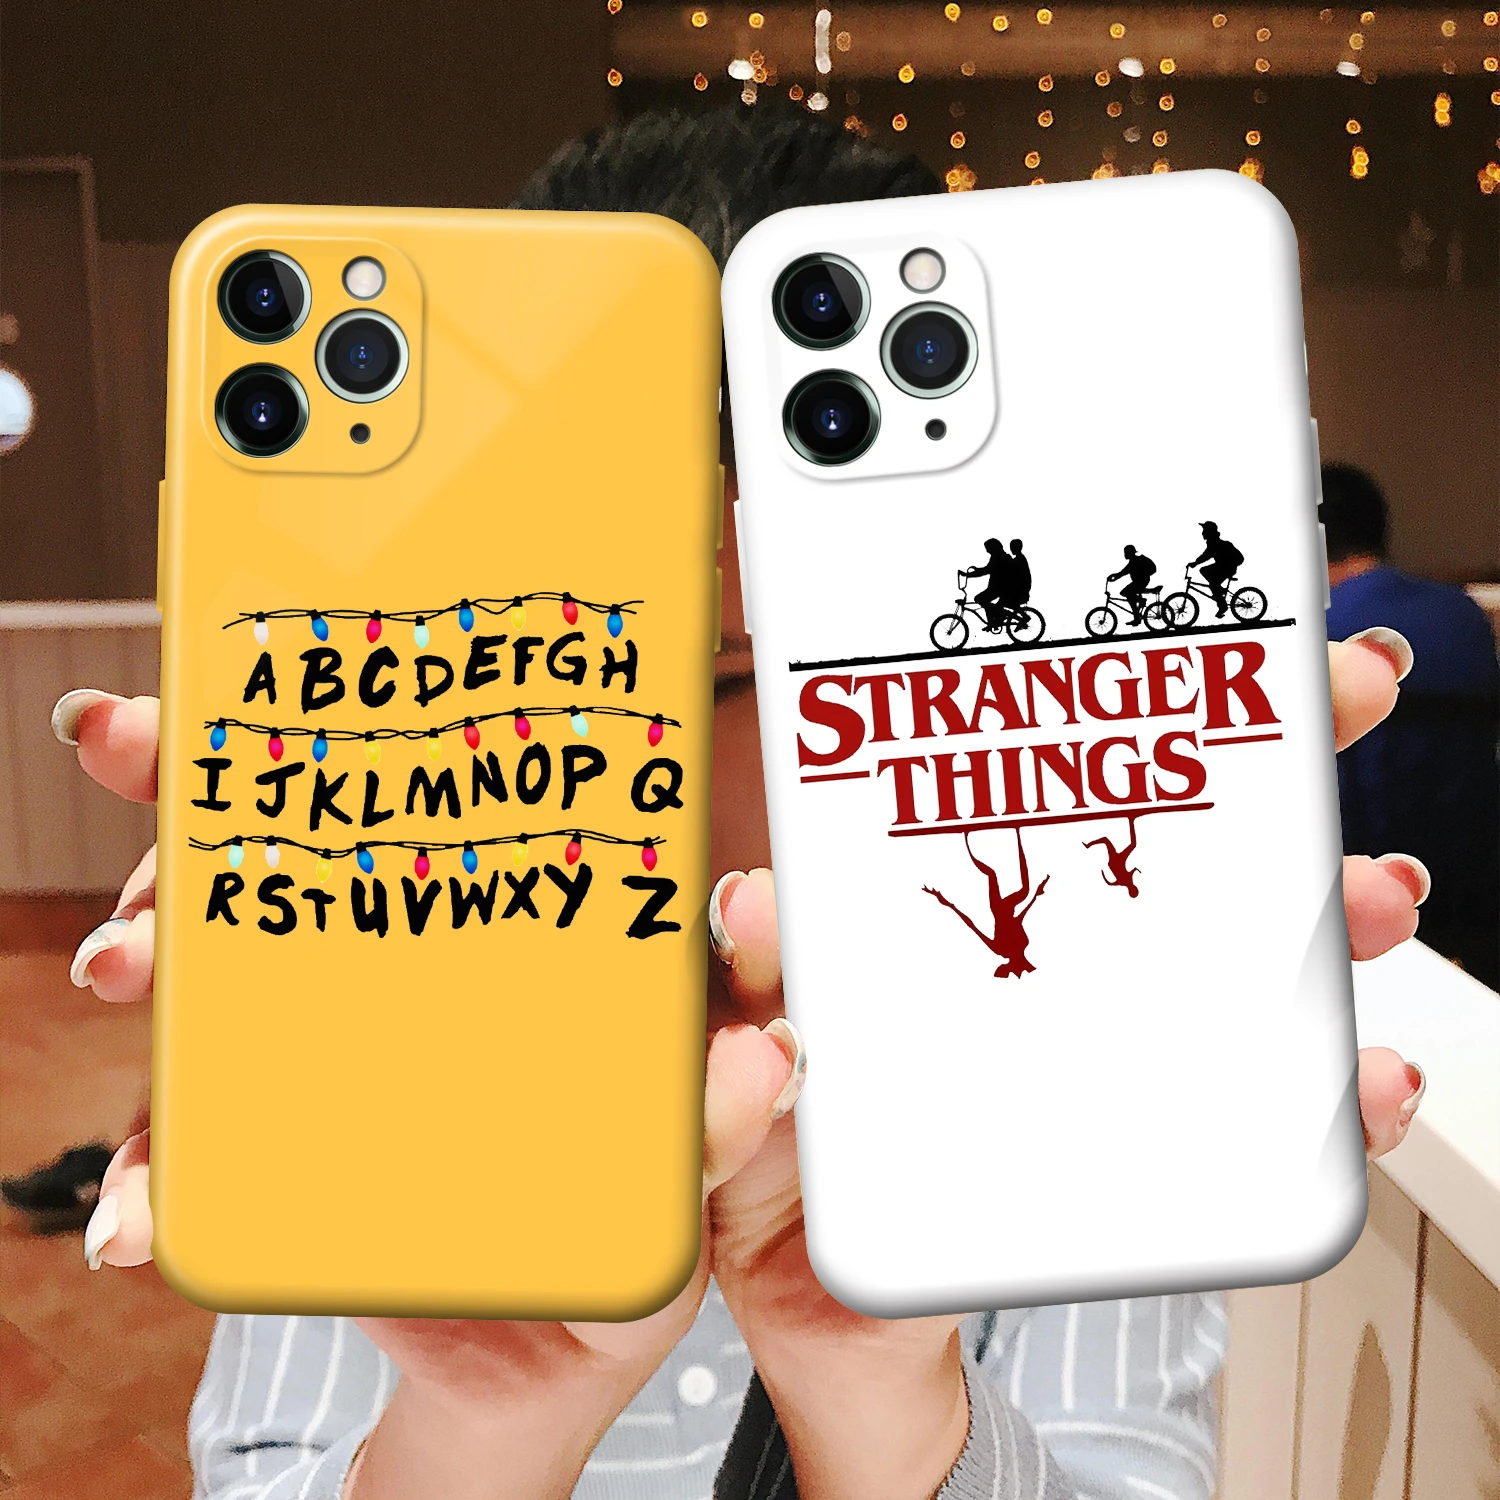 iphone 8 wallet case Stranger Things Christmas Lights Case For iphone 7 8 Plus X XS XR XS 11 12 Pro MAX Soft Matte silicone Phone Cases Back Cover iphone 8 plus wallet case